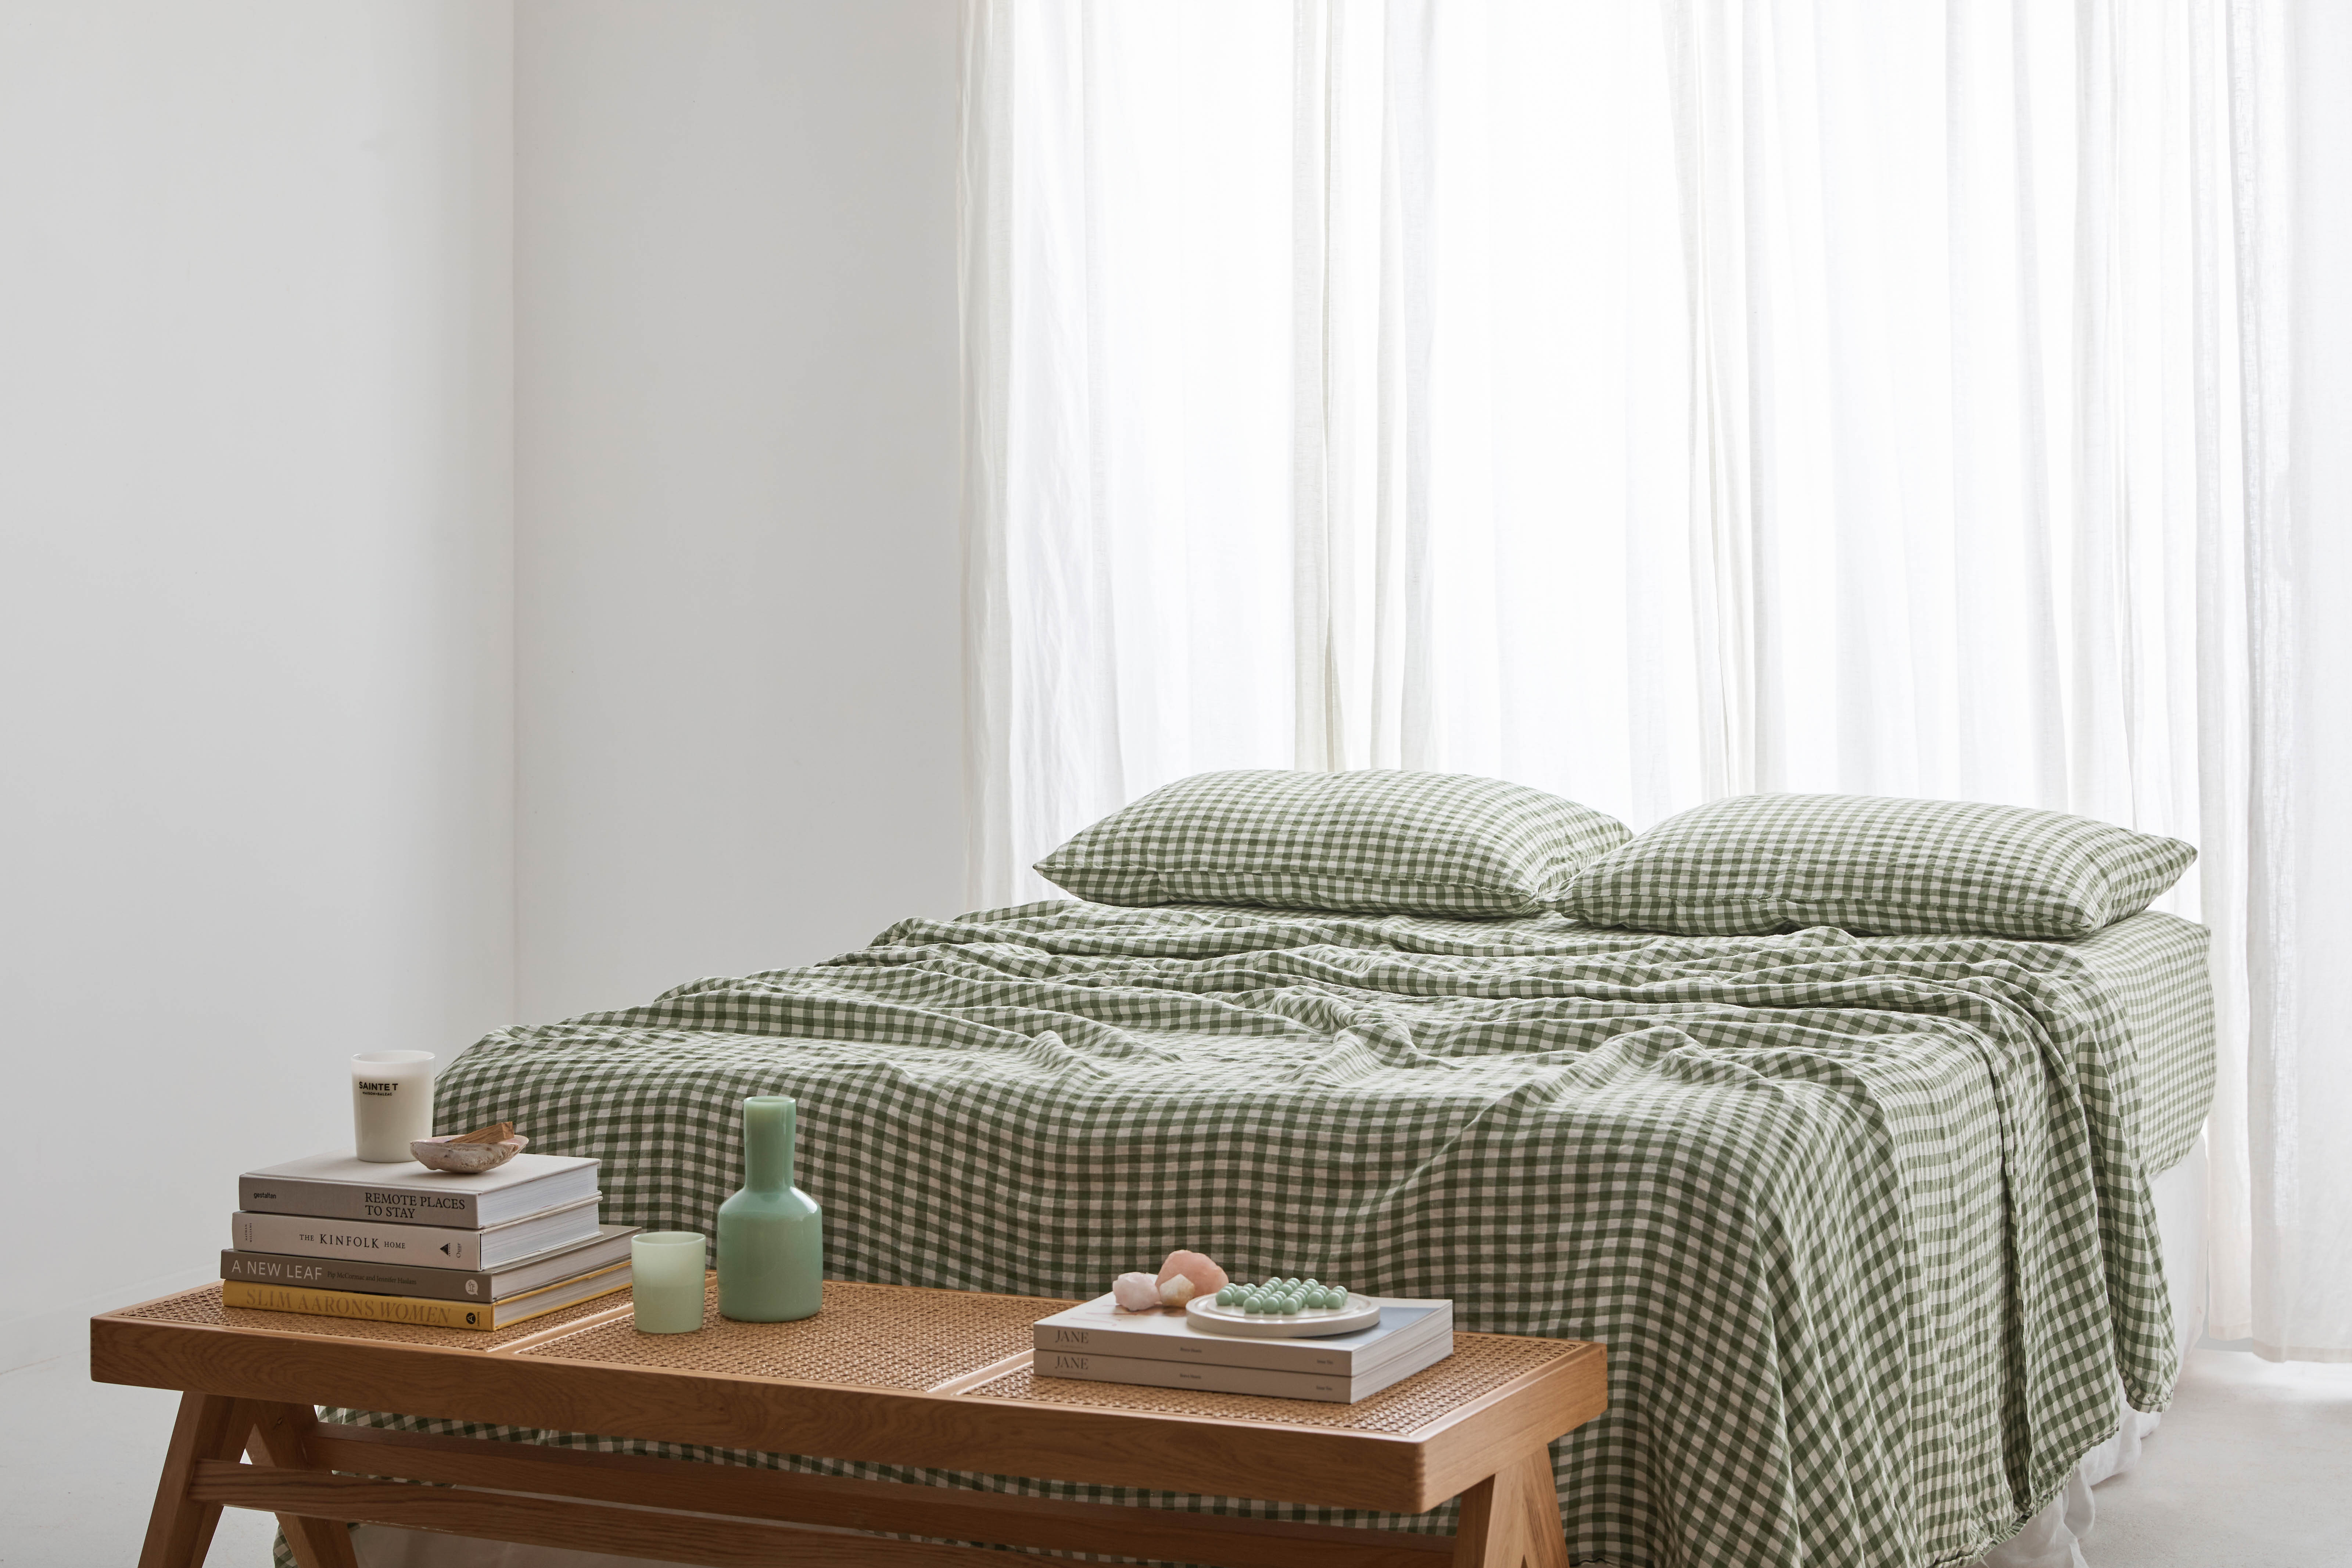 Bed Brands That Make Getting Out of Bed Even Tougher